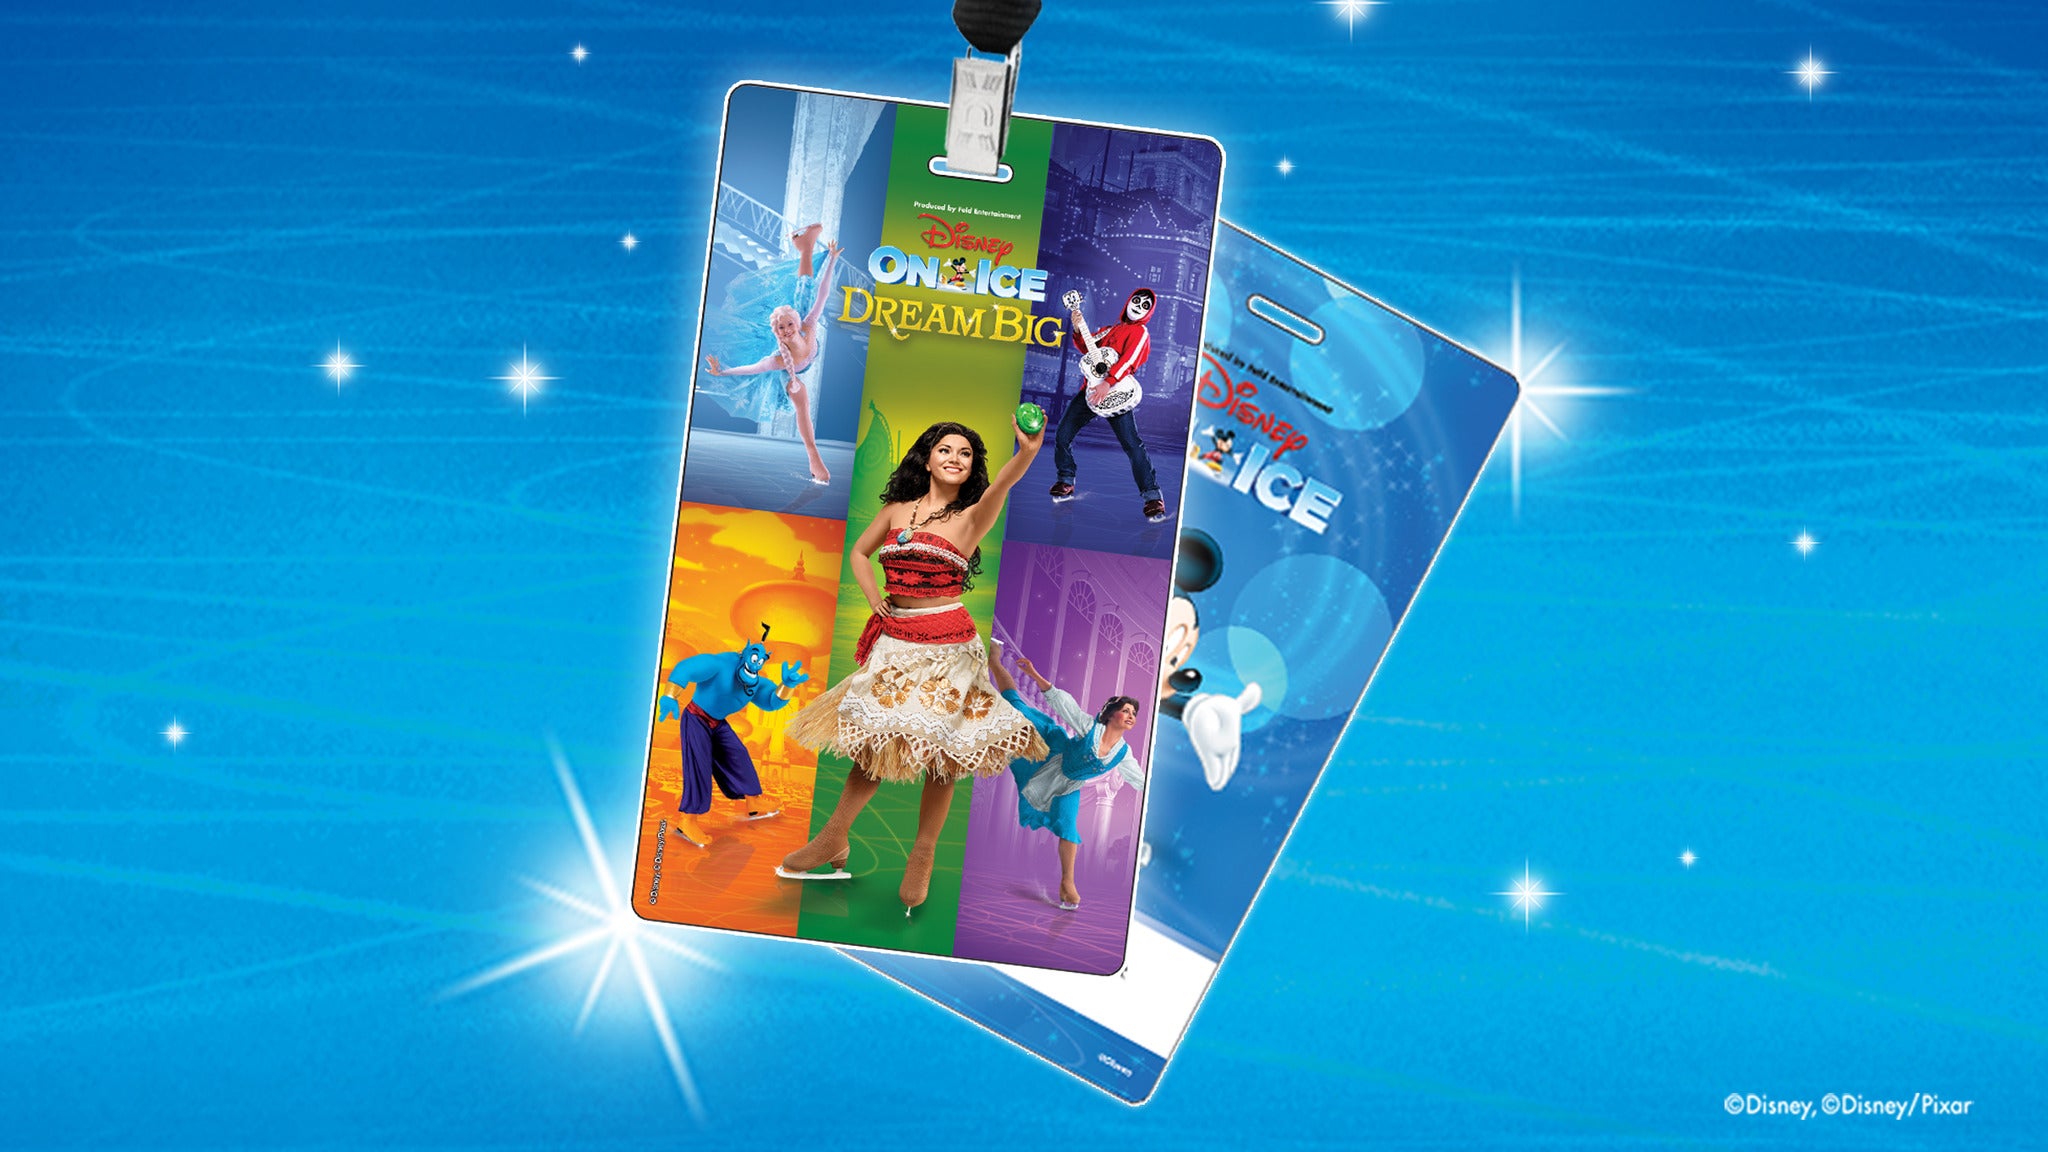 disney-on-ice-dream-big-official-souvenir-tag-tickets-event-dates